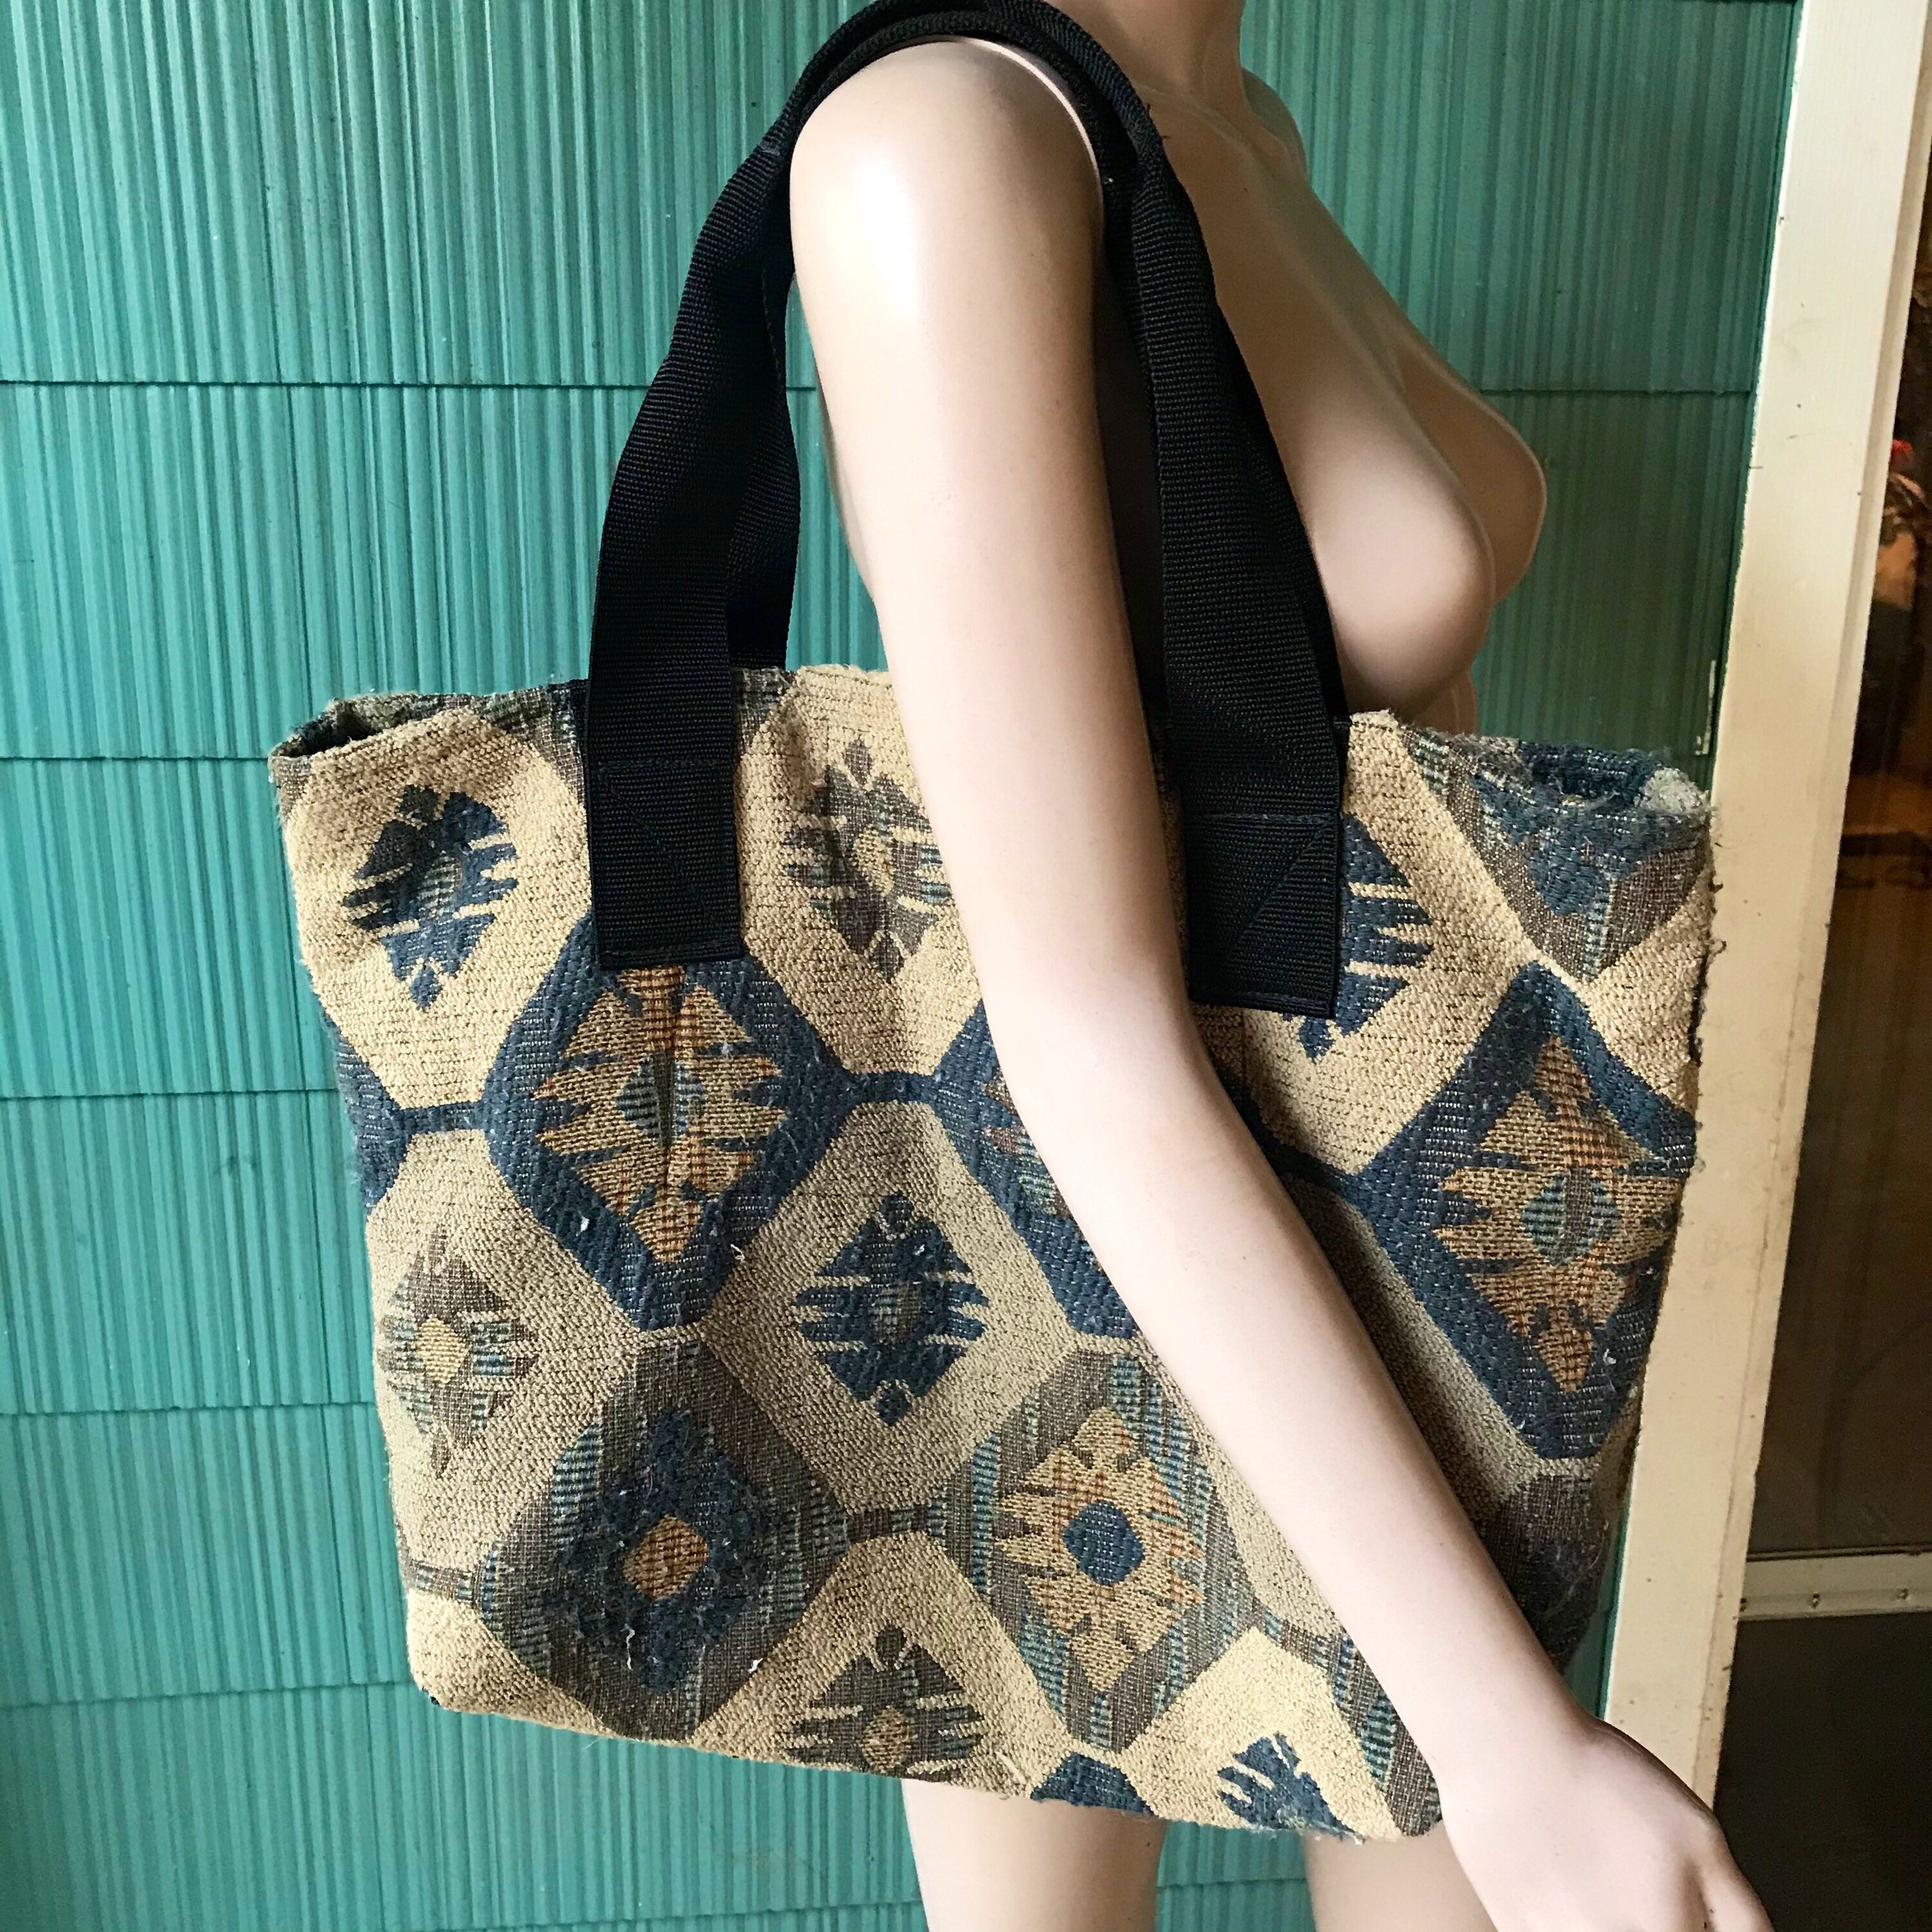 remain simple #vintage #tapestry #bag #outfit